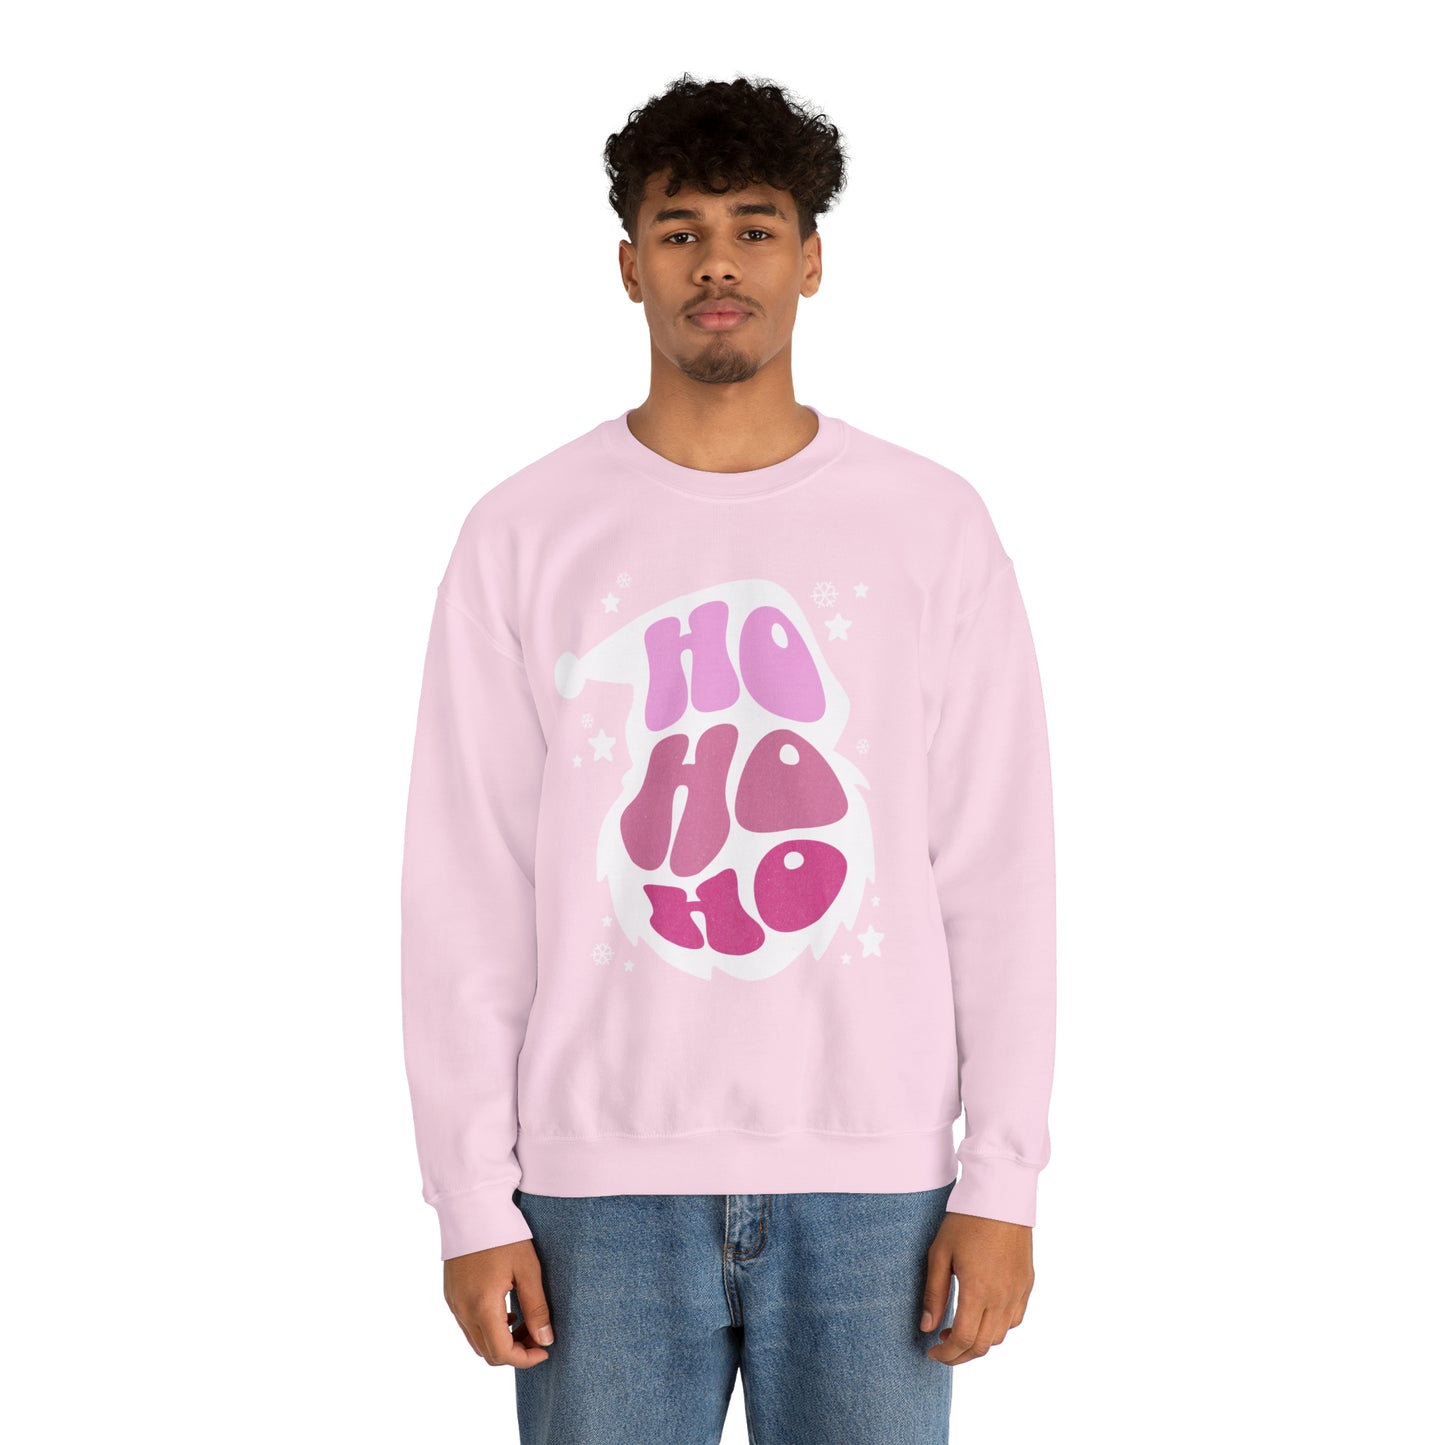 A man wearing a Printify Ho Ho Ho Santa Outline Pink Holiday Sweatshirt - Cozy Crewneck - Festive Christmas Sweater, combining comfort and style with the word "oh" on it.